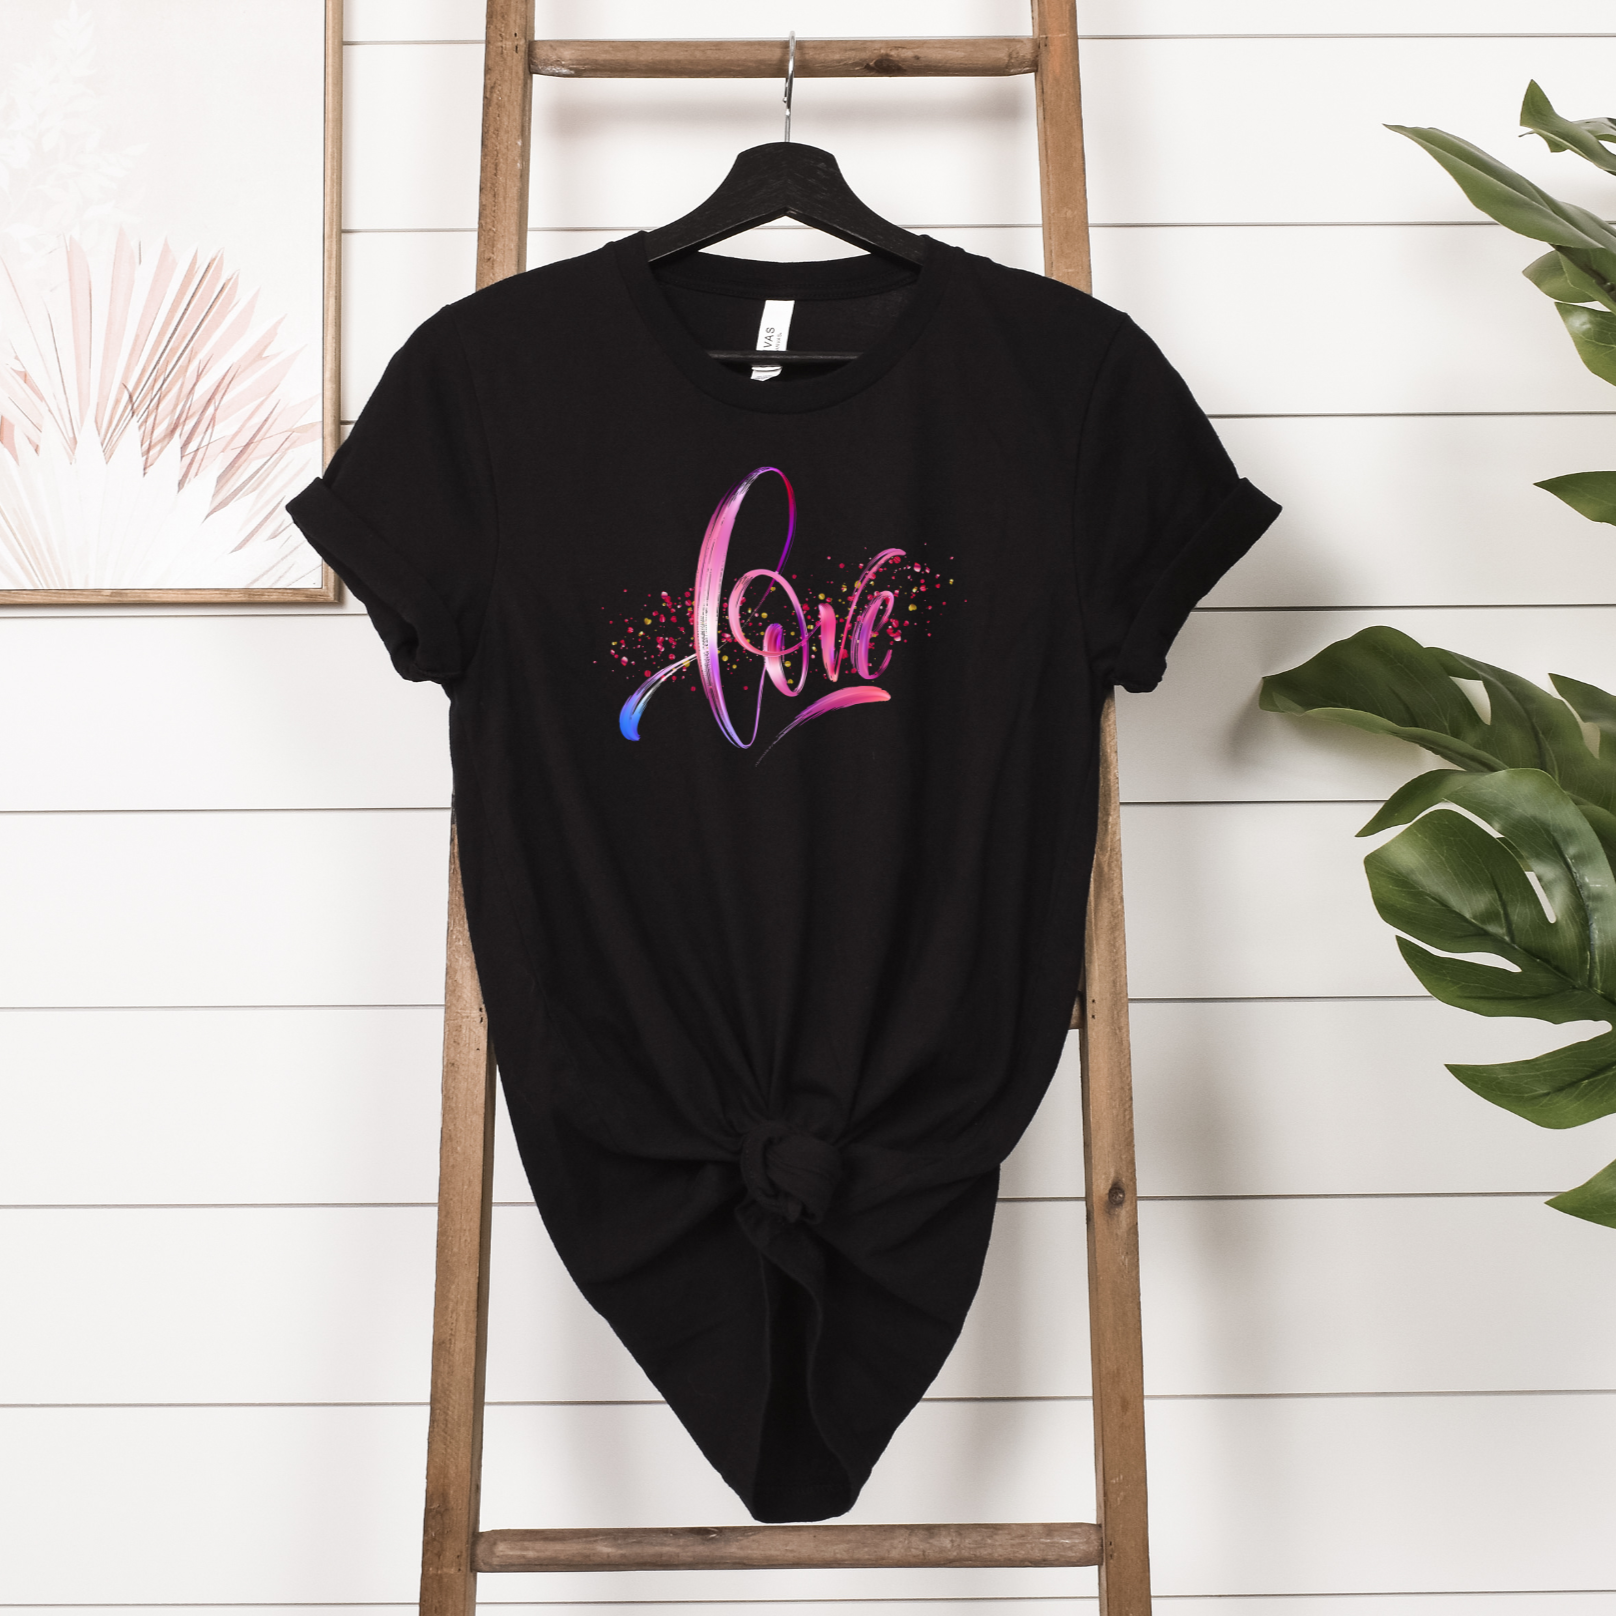 Story of Awakening Lifestyle Community Spirituality Relationships Love Light Meditation Oneness Earth Balance Healing Shop Store Charity Tree Nature Read Write T shirt Tops Tees Clothing Women Horoscope Love quote Valentines Day